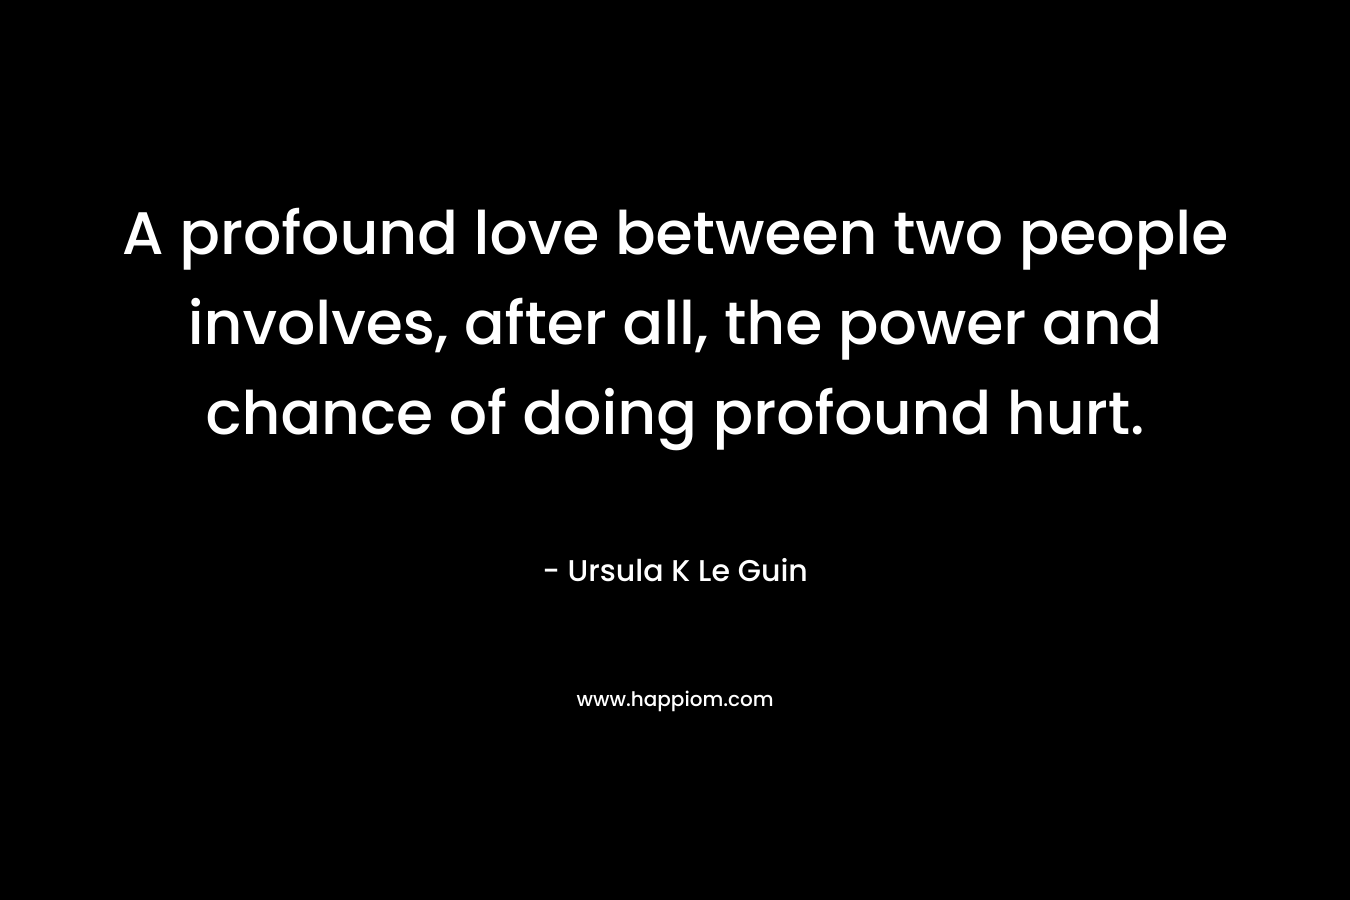 A profound love between two people involves, after all, the power and chance of doing profound hurt.